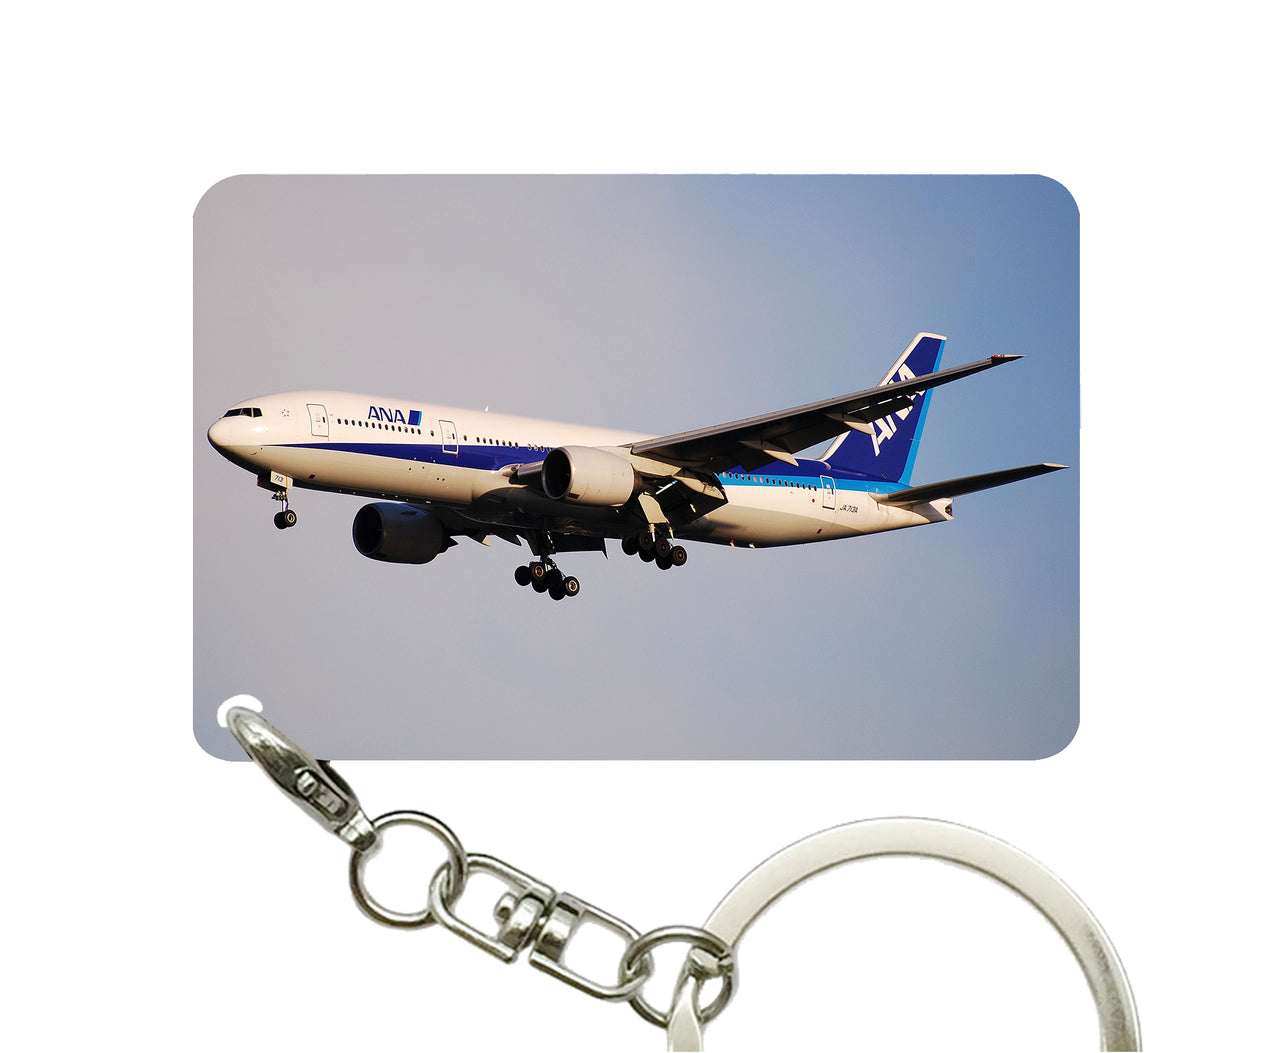 ANA's Boeing 777 Designed Key Chains